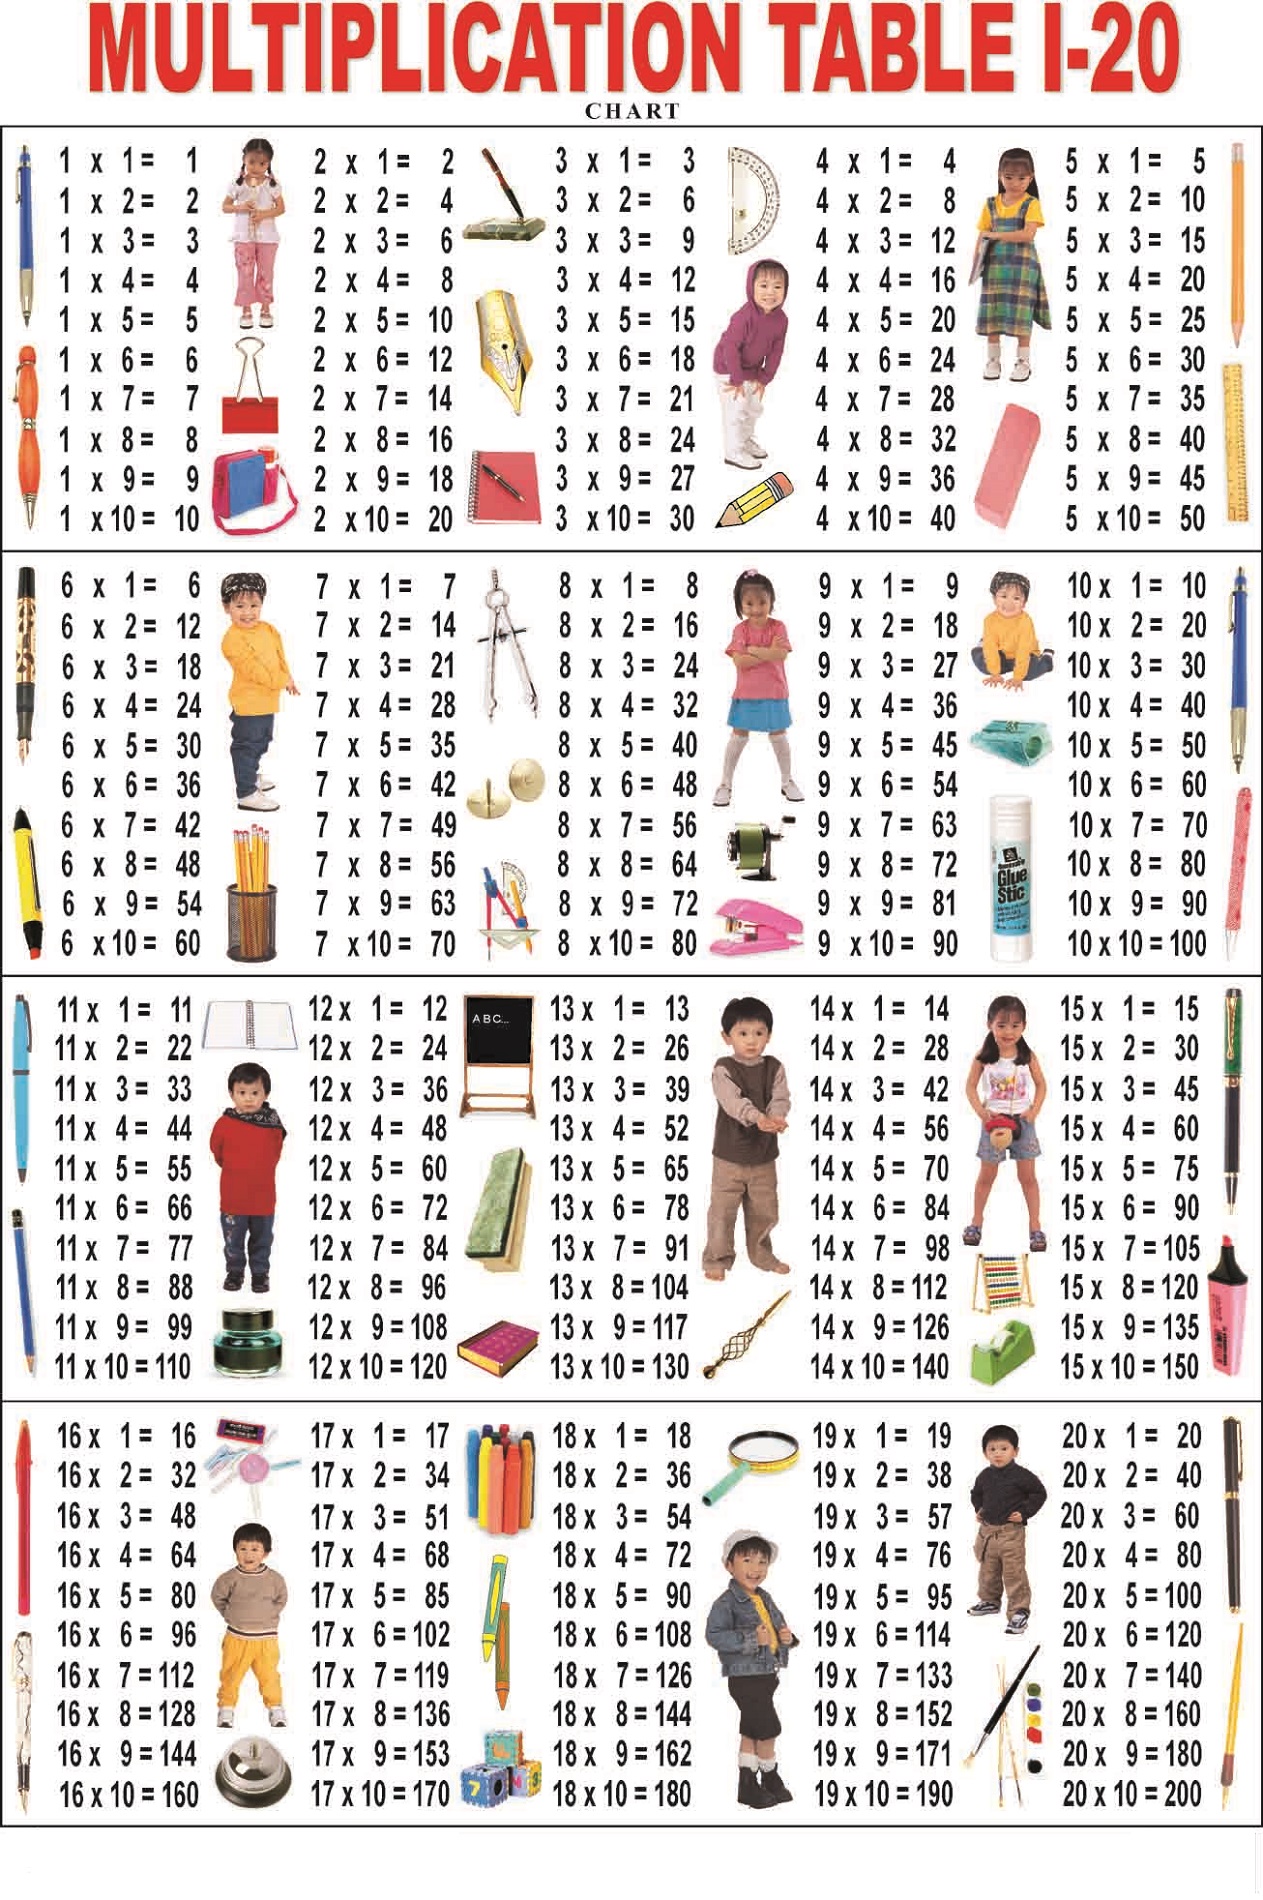 6 times table chart for kids